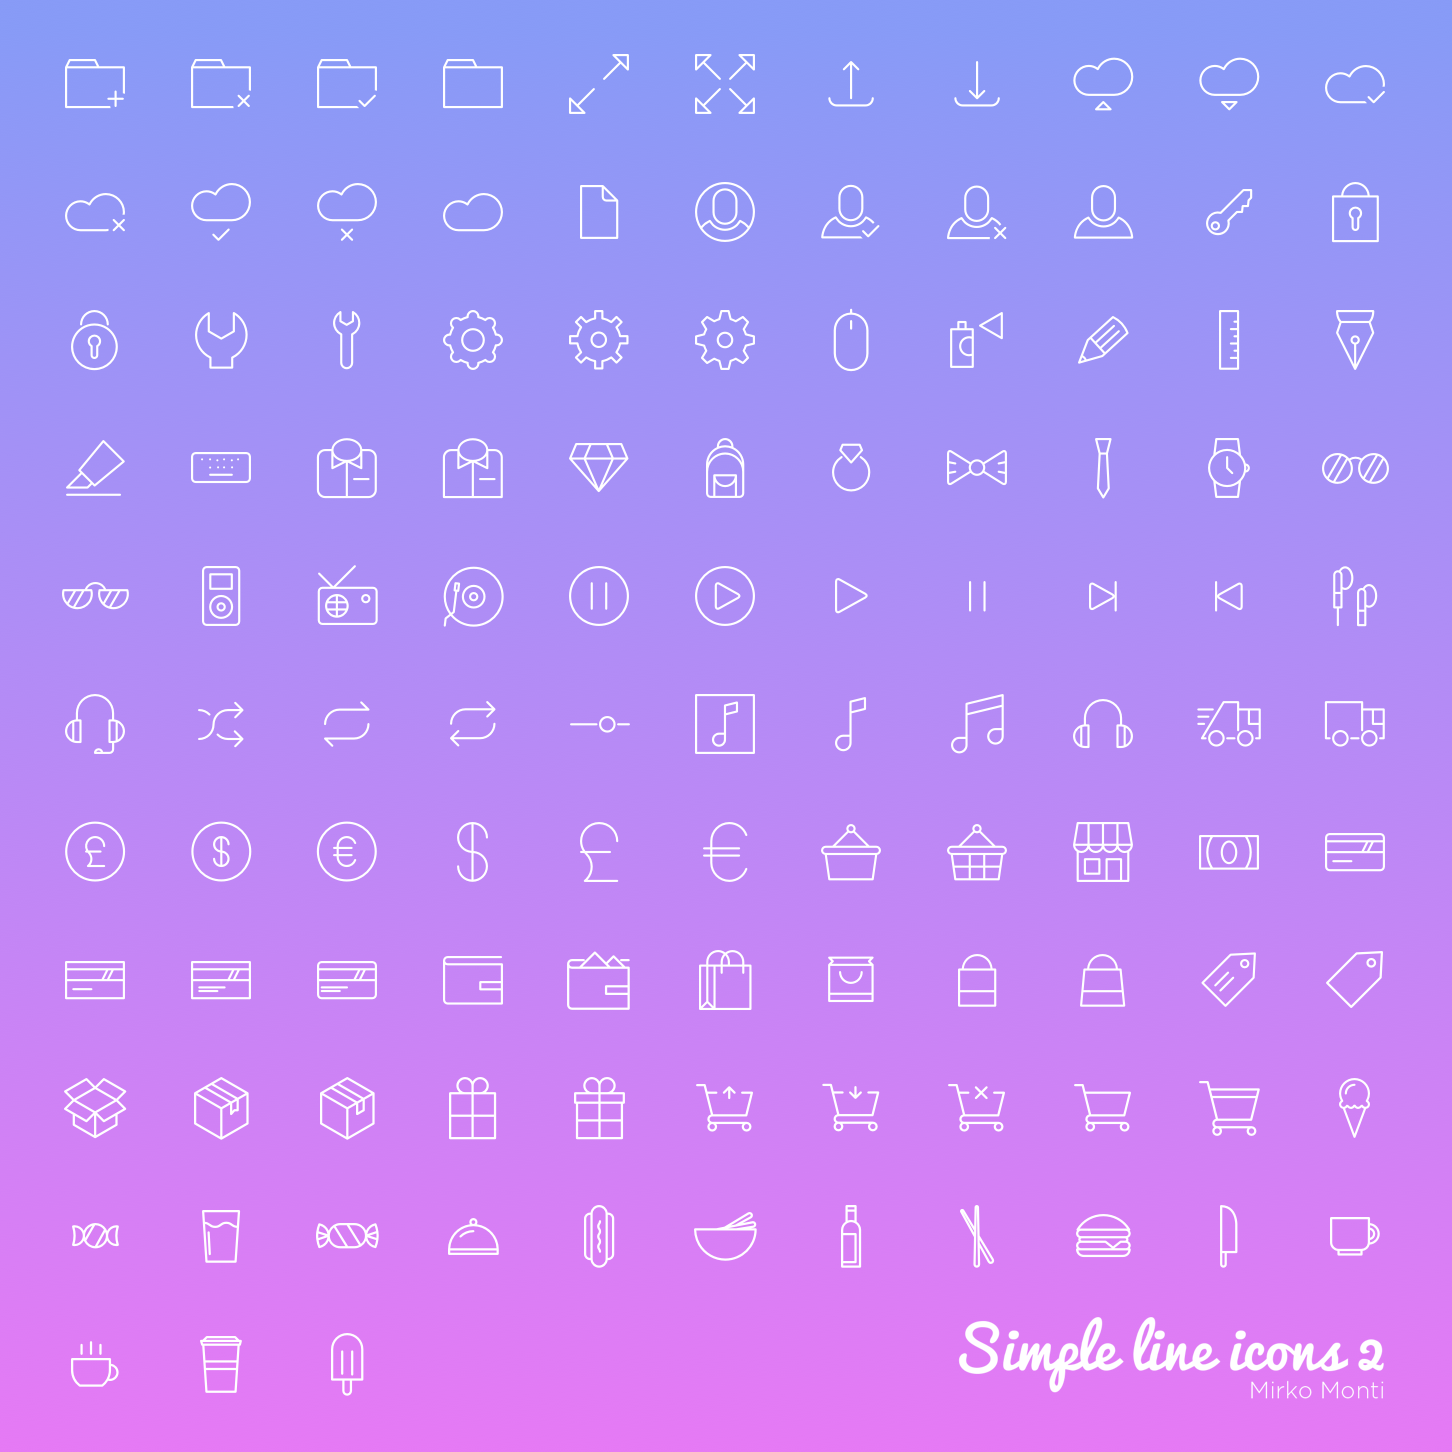 Simple line icons 2 by Mirko Monti